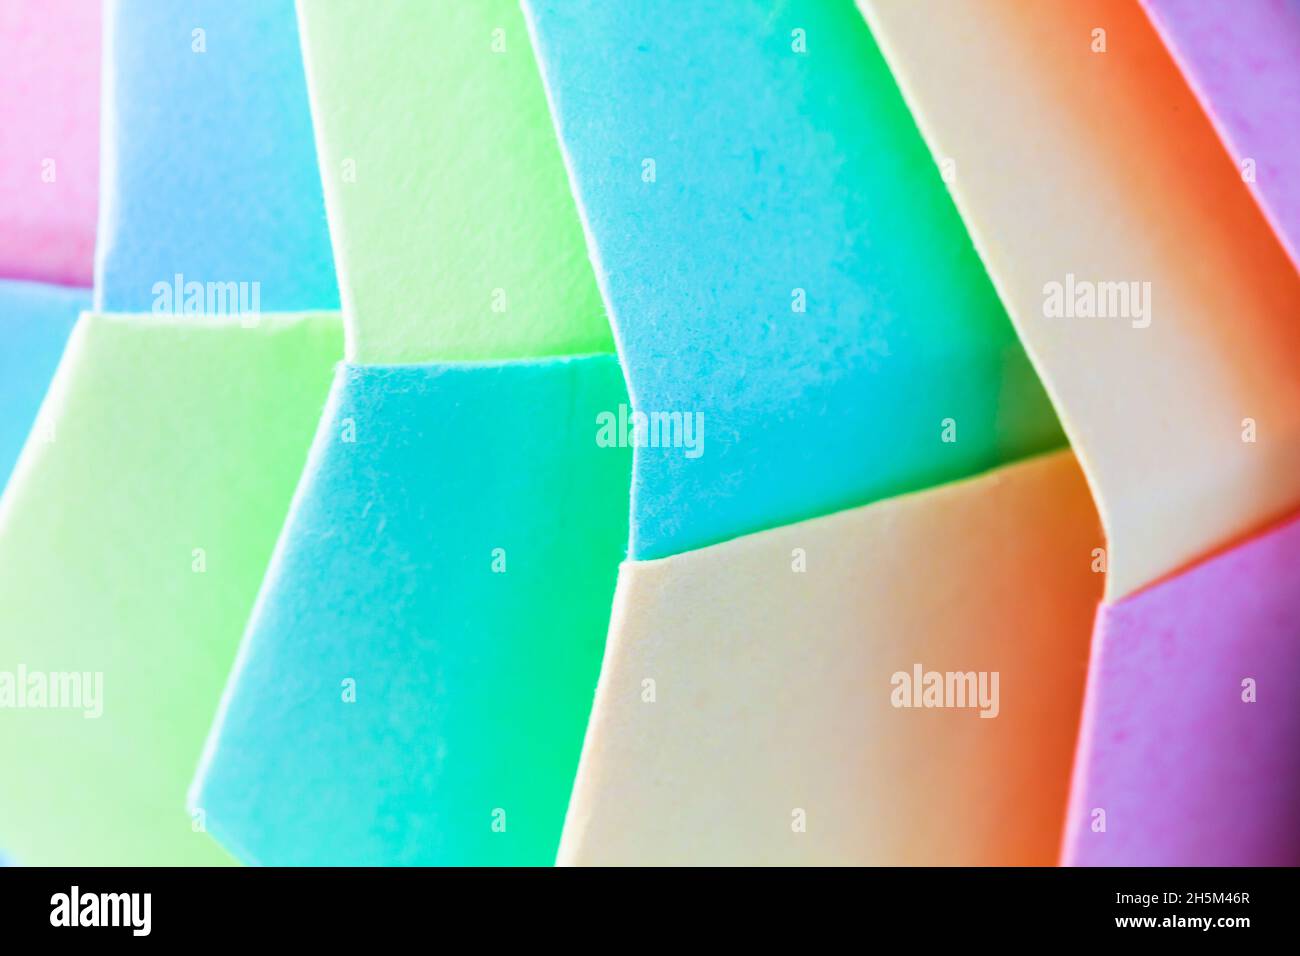 Colorful origami background, abstract parametric pattern made of paper sheets Stock Photo